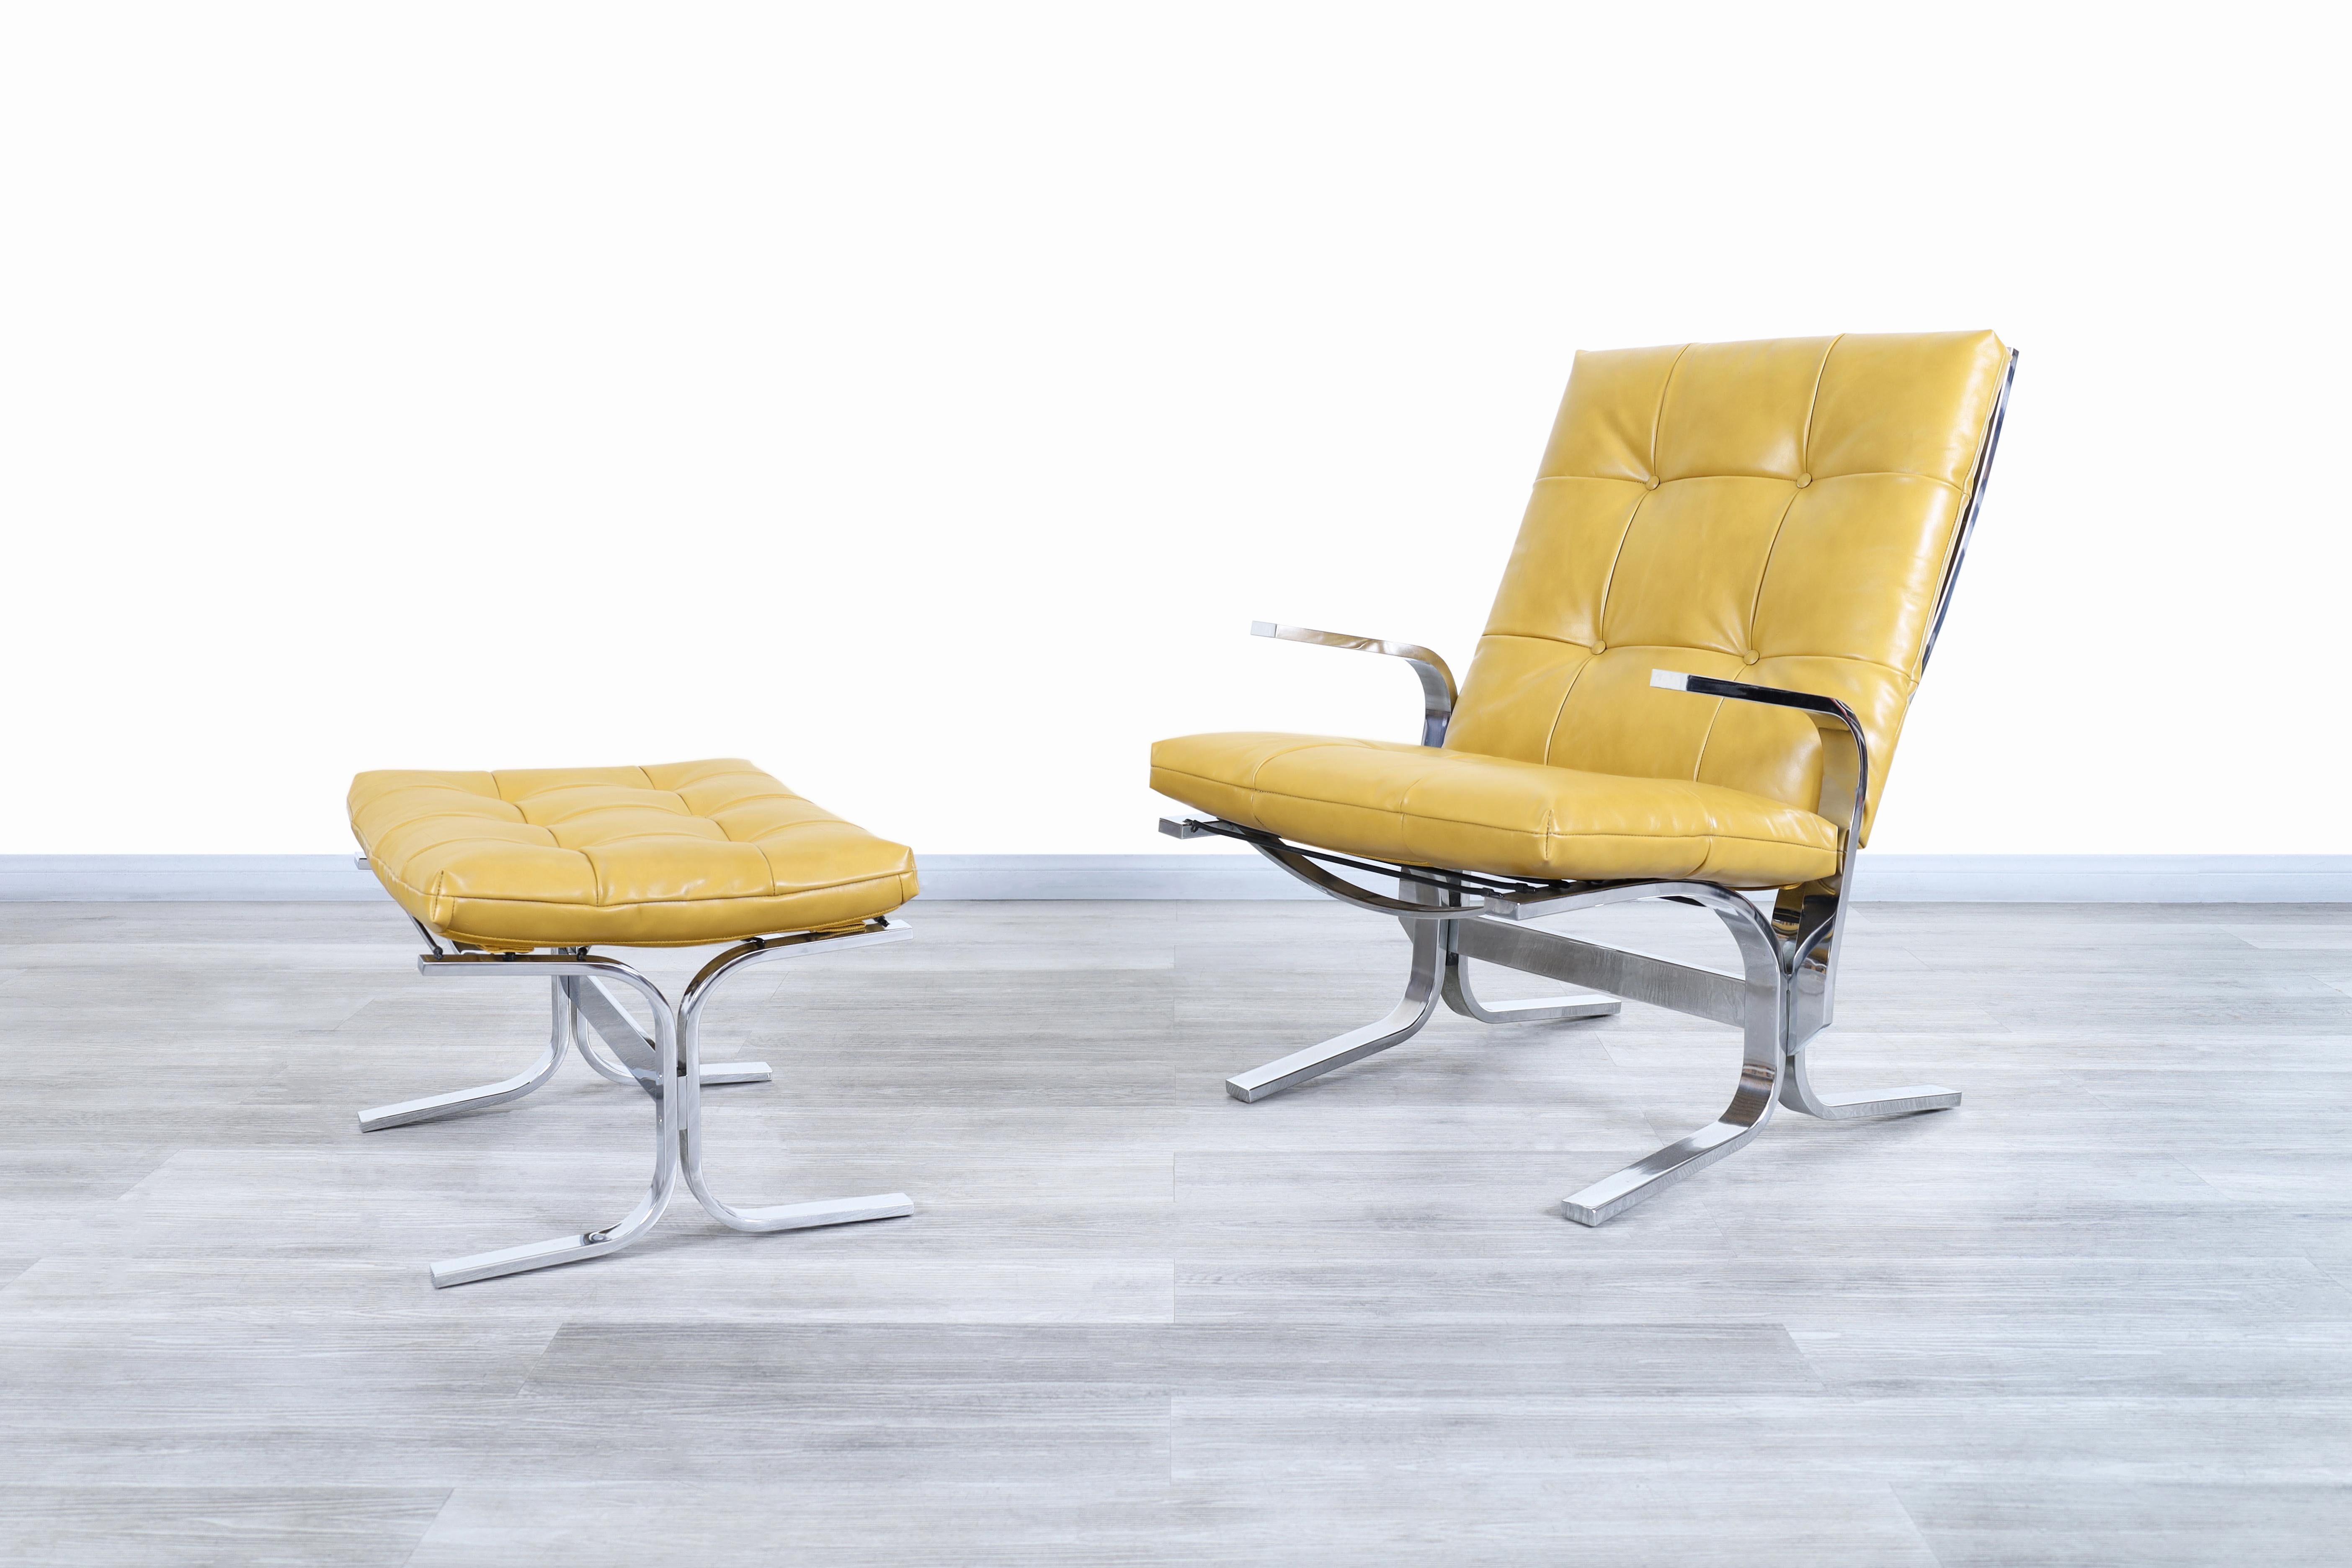 Stunning midcentury chrome and leather lounge chairs and ottoman manufactured in the United States, circa 1970s. The chair and the ottoman have a luxurious design due to the elegant materials used in their construction. Both chair and ottoman have